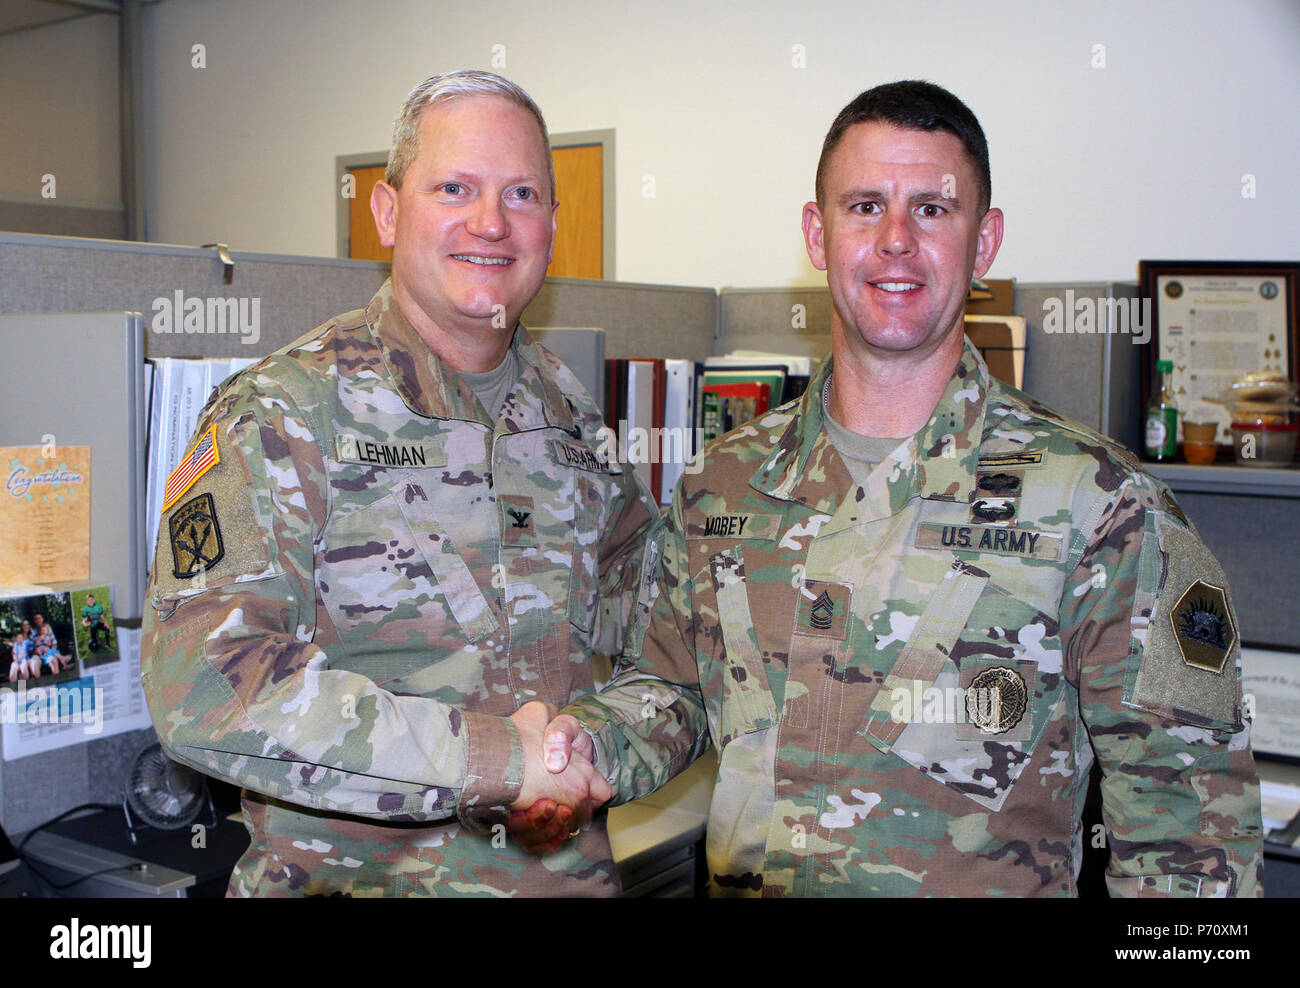 Master Sgt. Brandon S. Morey, right, assistant inspector general at the California National Guard’s Inspector General’s Office, is congratulated by Col. Robert J. Lehman, State Inspector General, May 12 after earning runner-up in the prestigious Dept. of the Army Inspector General Noncommissioned Officer of the Year competition recently. Morey, of Dixon, California, took top honors in April’s National Guard Bureau Inspector General Soldier of the Year to earn the shot at the U.S. Army contest. Stock Photo